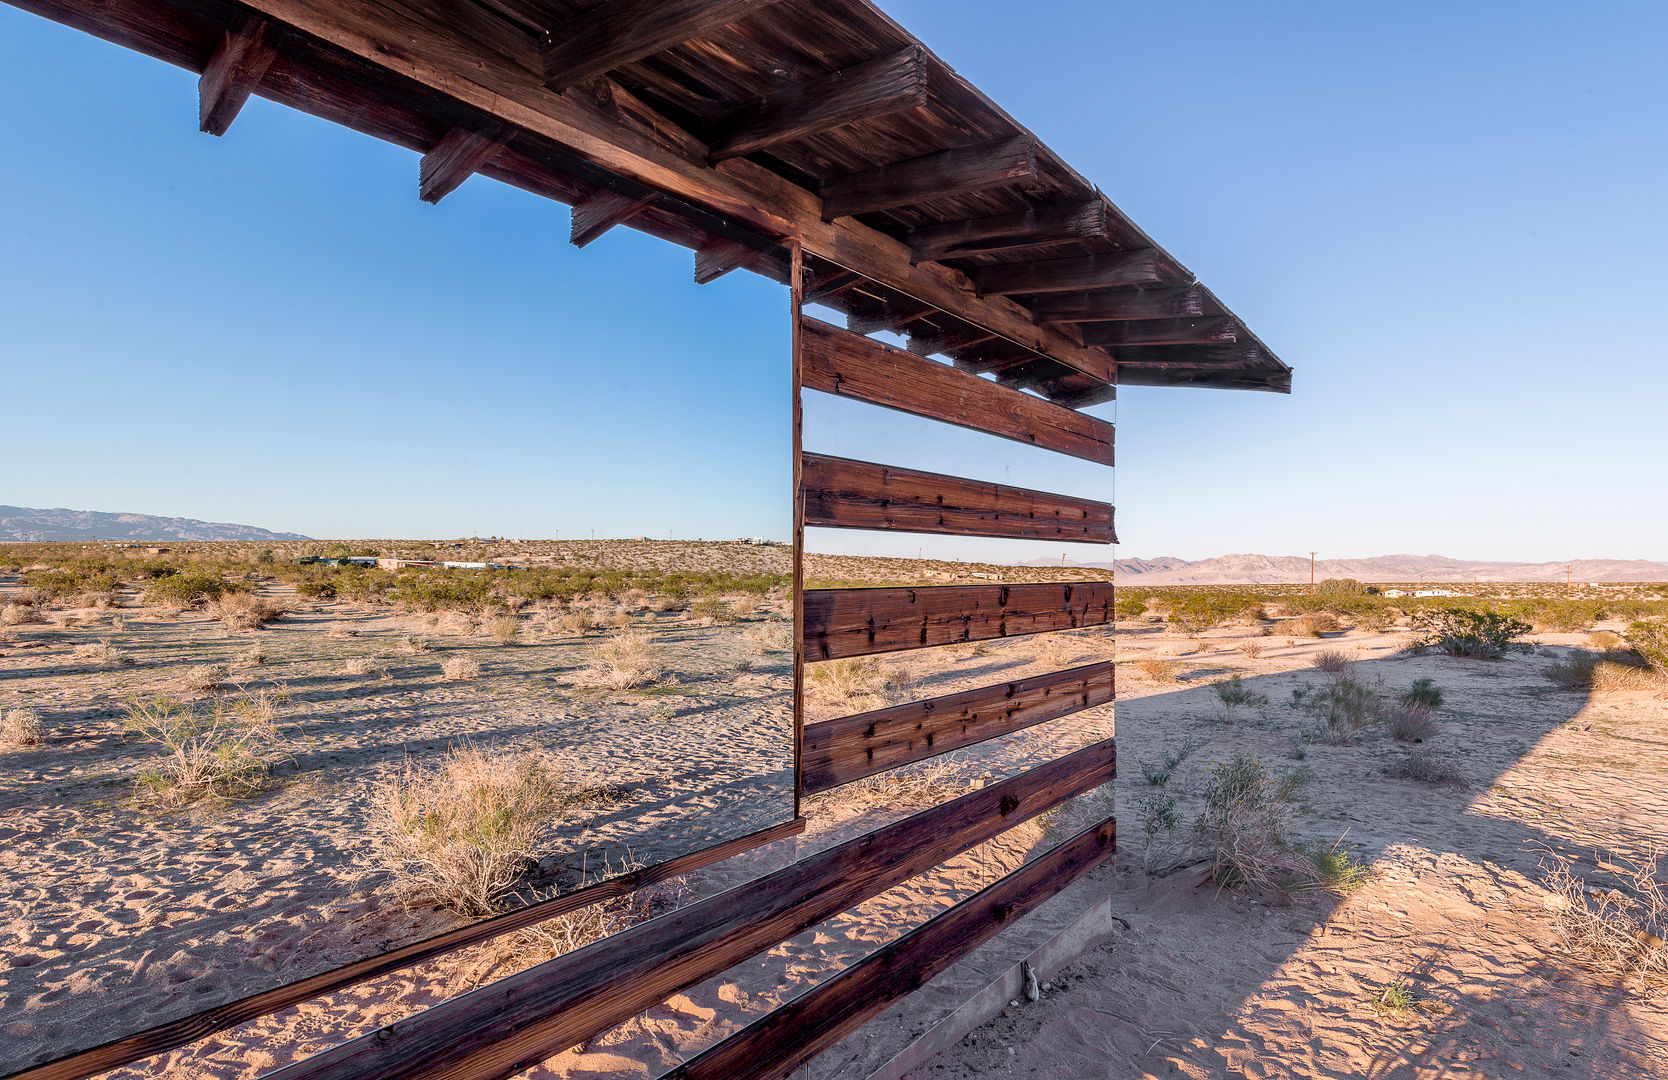 Lucid Stead, royale projects : contemporary art royale projects : contemporary art オリジナルな 家